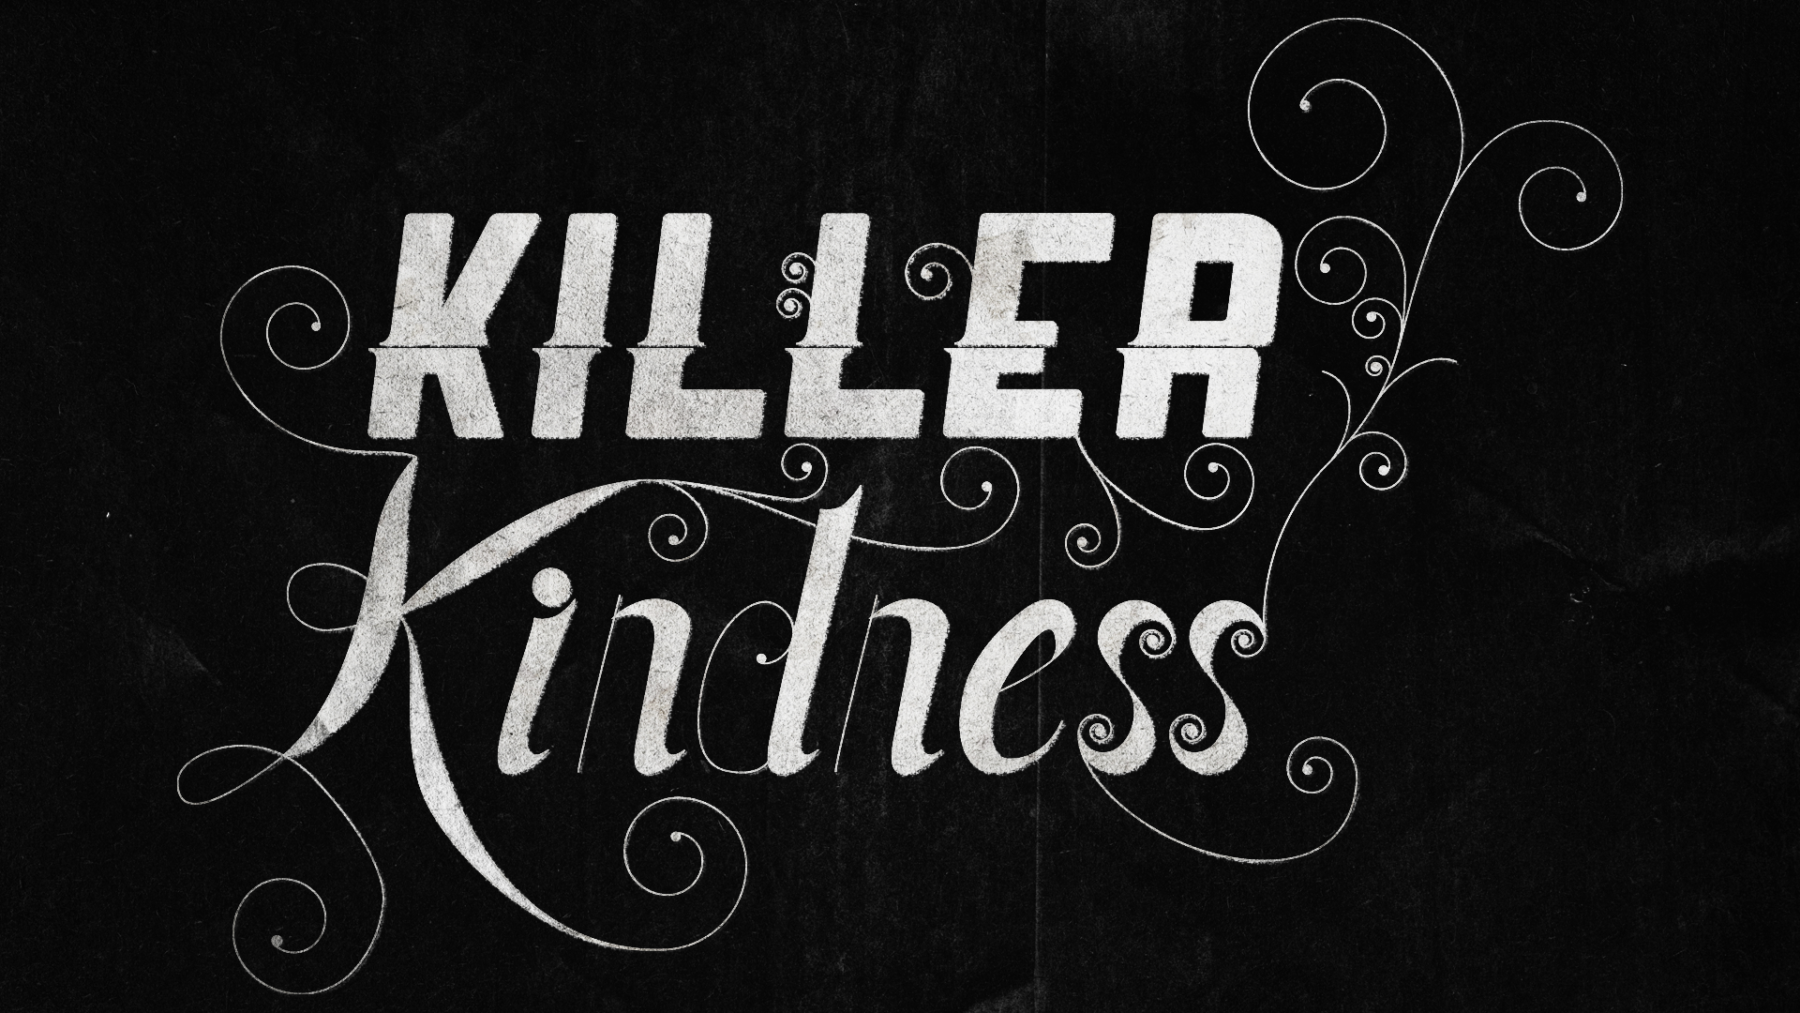 Has Kindness Been Killed in You? - Sandals Church | Sandals Church